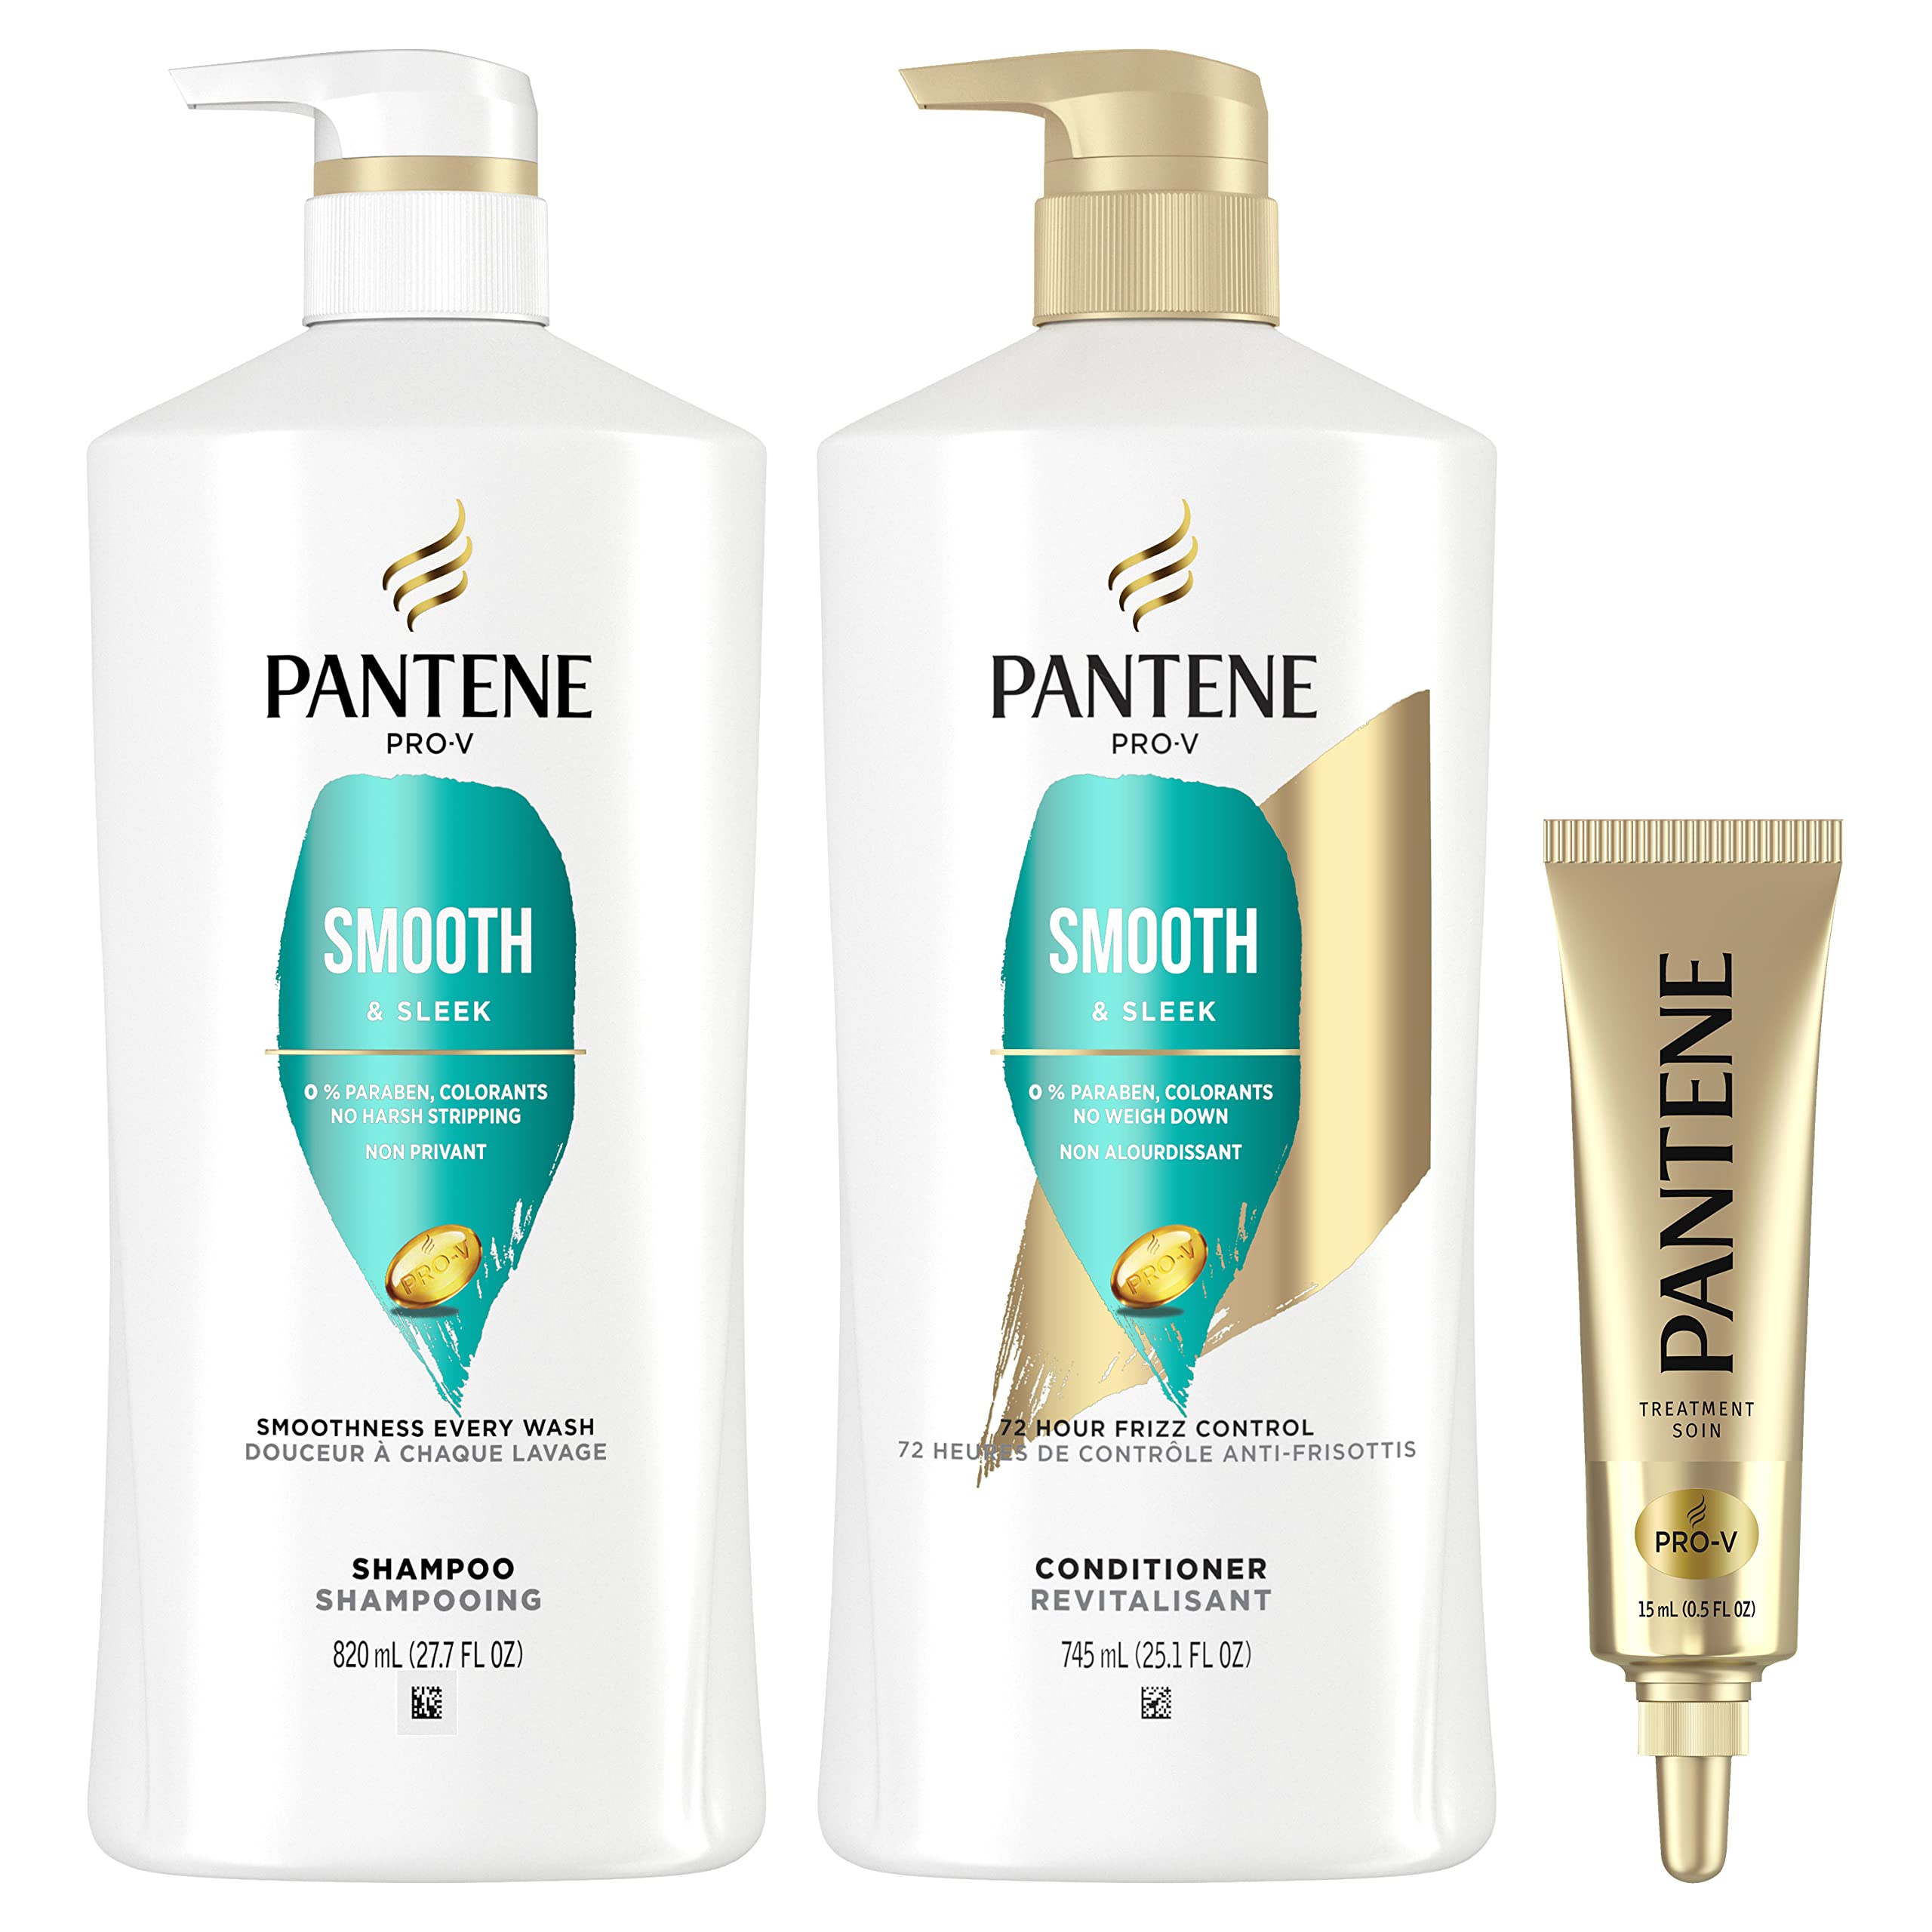 Pantene Shampoo, Conditioner and Hair Treatment Set, Smooth and Sleek for  Frizz Control, Safe for Color-Treated Hair